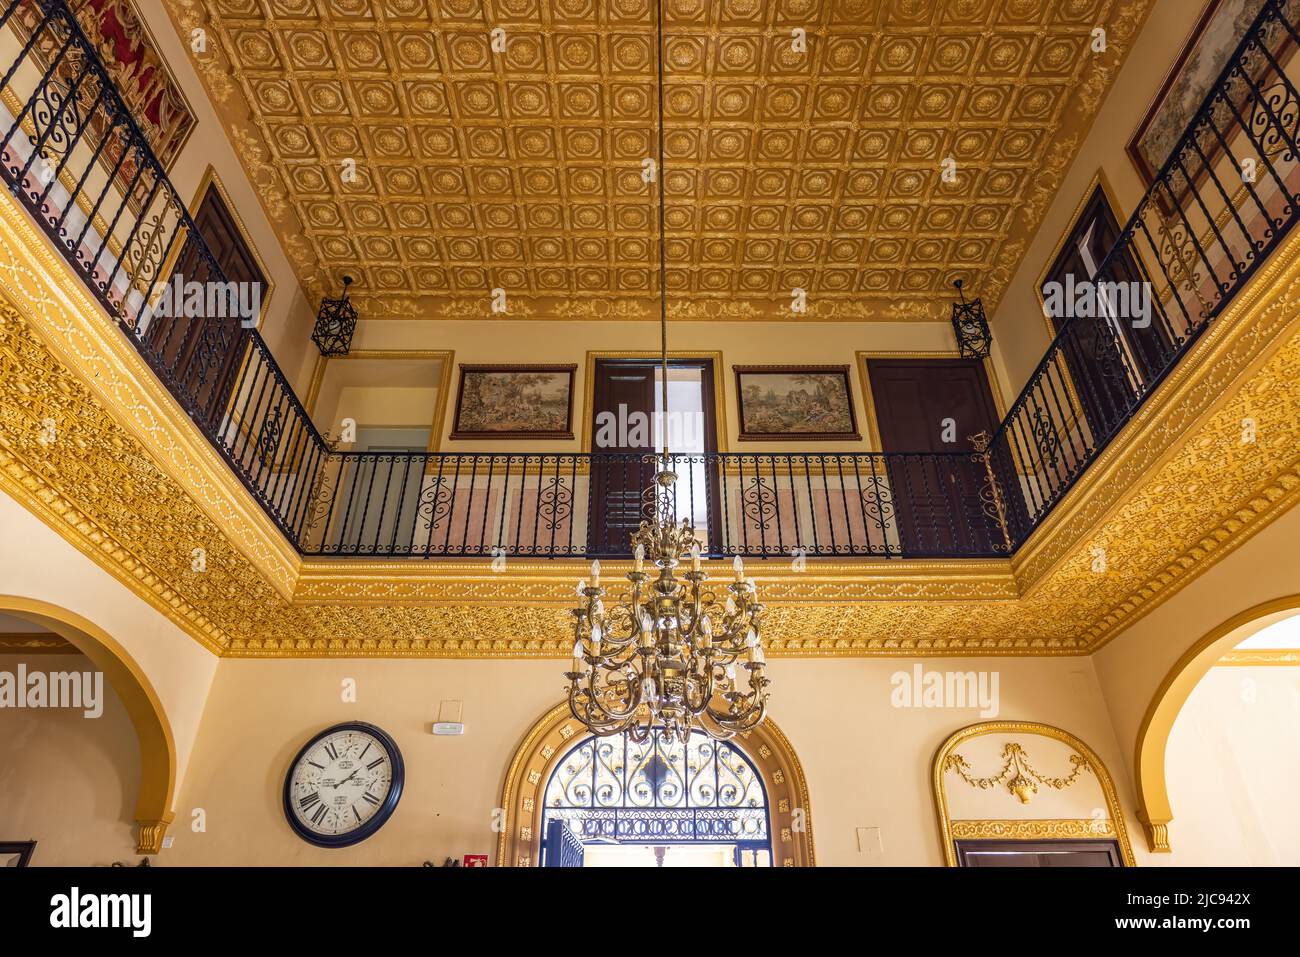 Trigueros, Huelva, Spain - April 17, 2022: Interior of Recreational and Cultural Circle of Trigueros, also known as Trigueros Casino. Beautifully deco Stock Photo